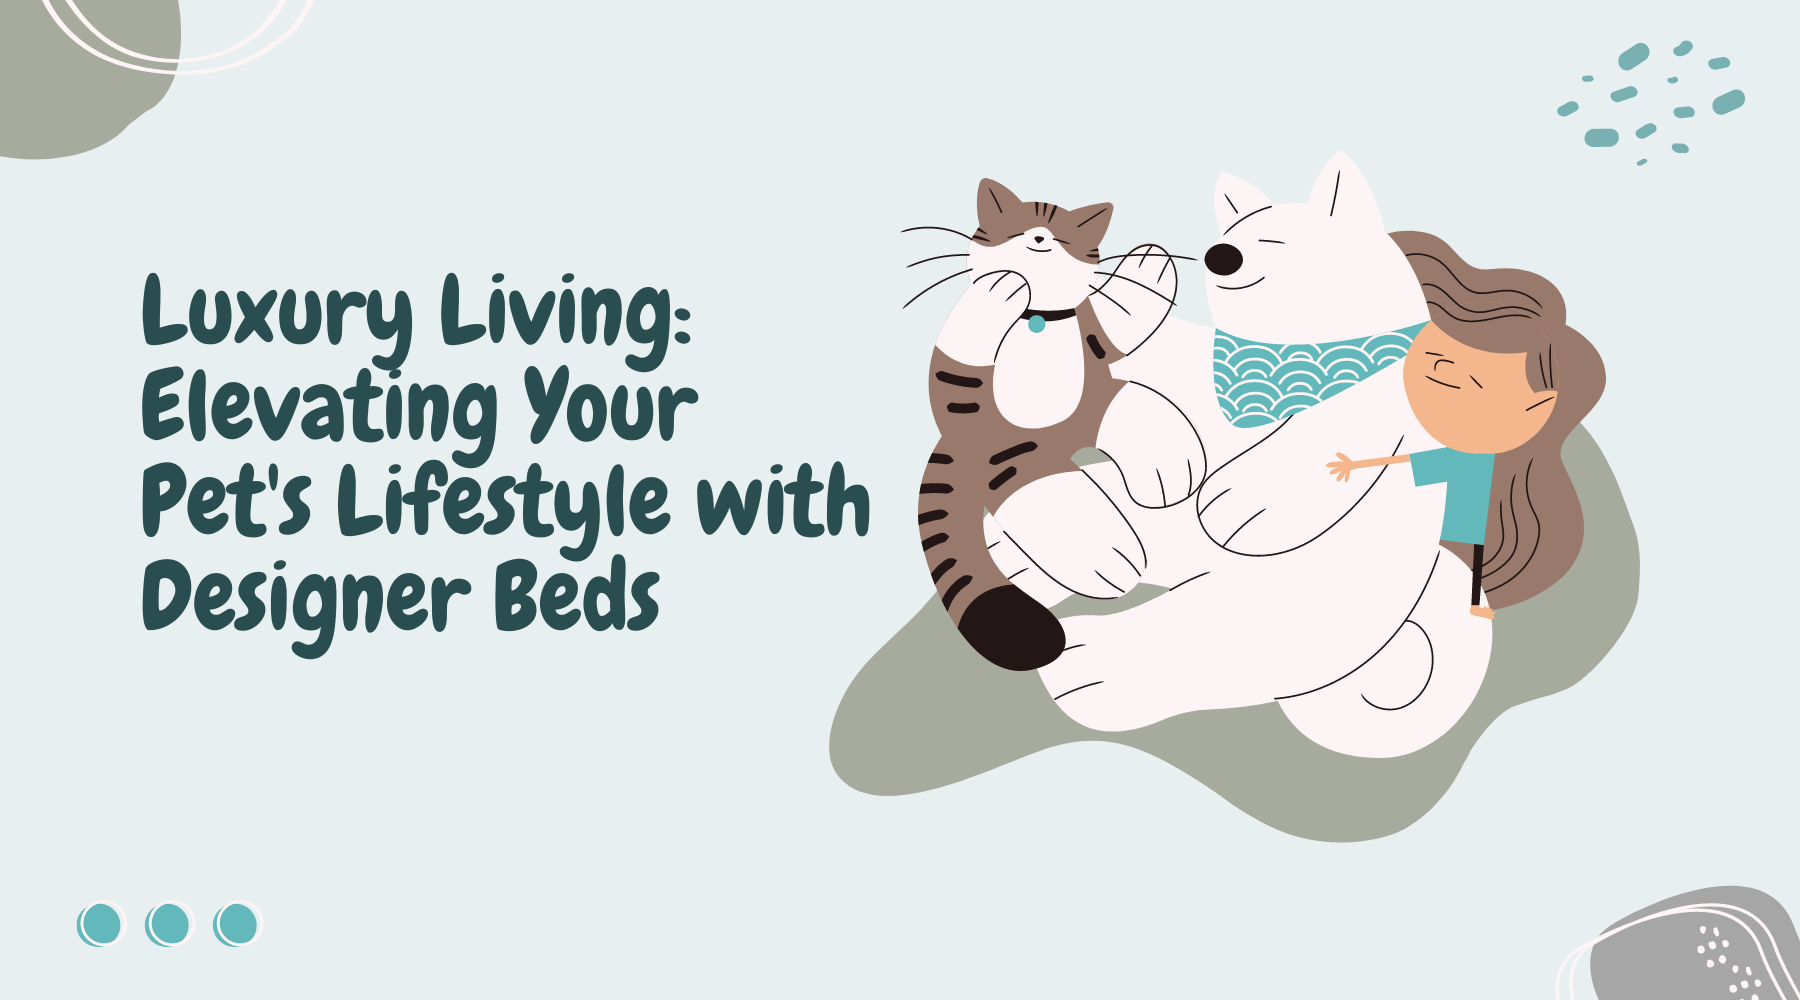 Luxury Living: Elevating Your Pet's Lifestyle with Designer Beds